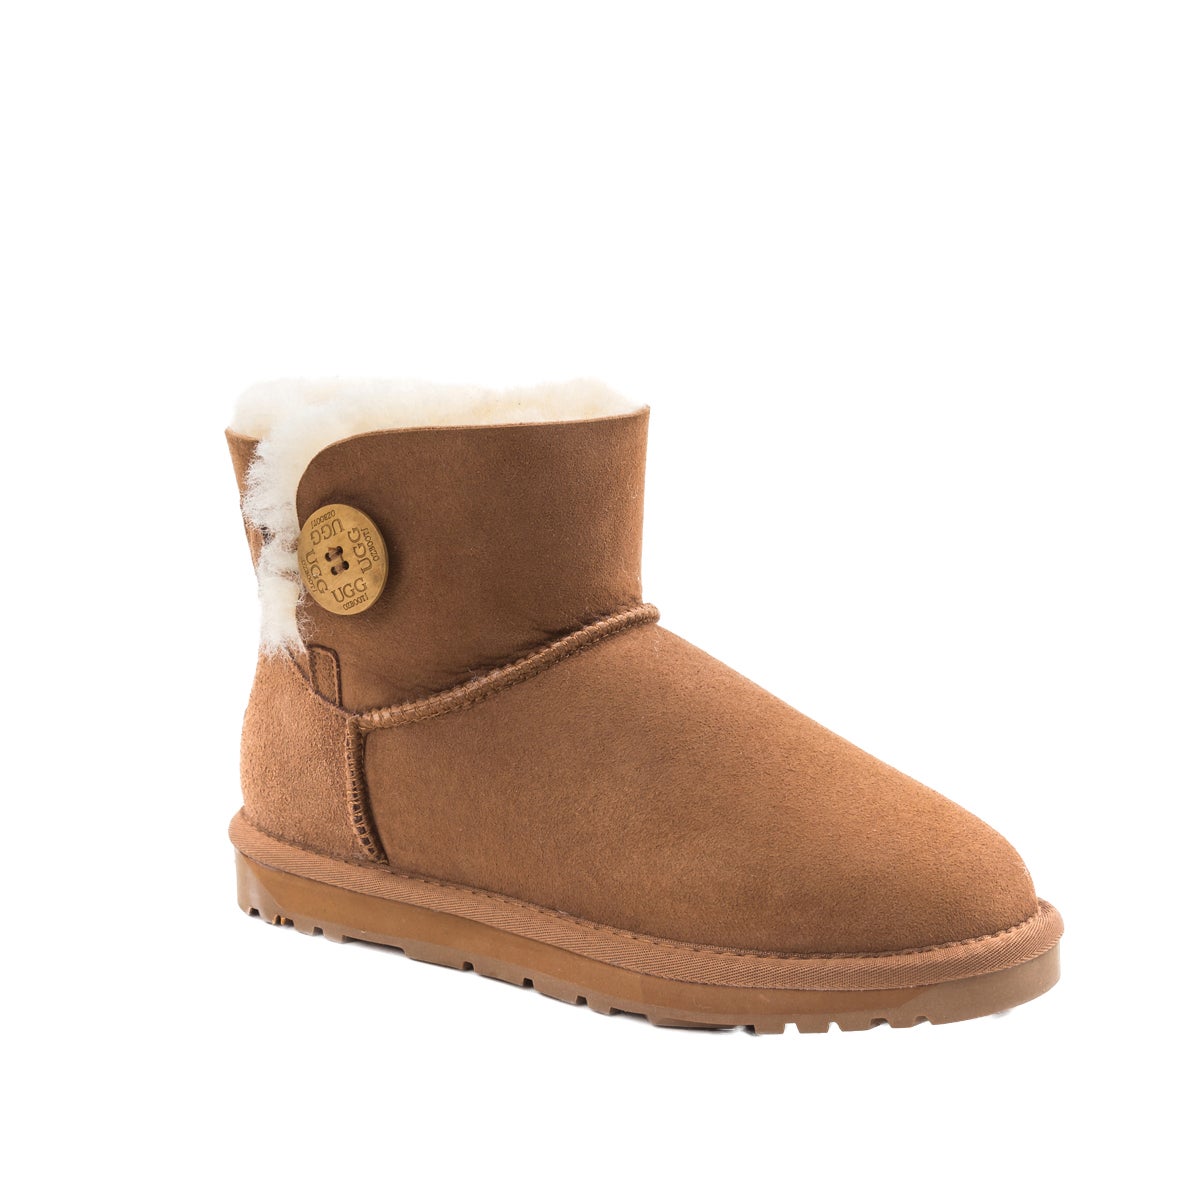 Ugg Classic Mini Button Boots (Water Resistant) Ozwear Ugg